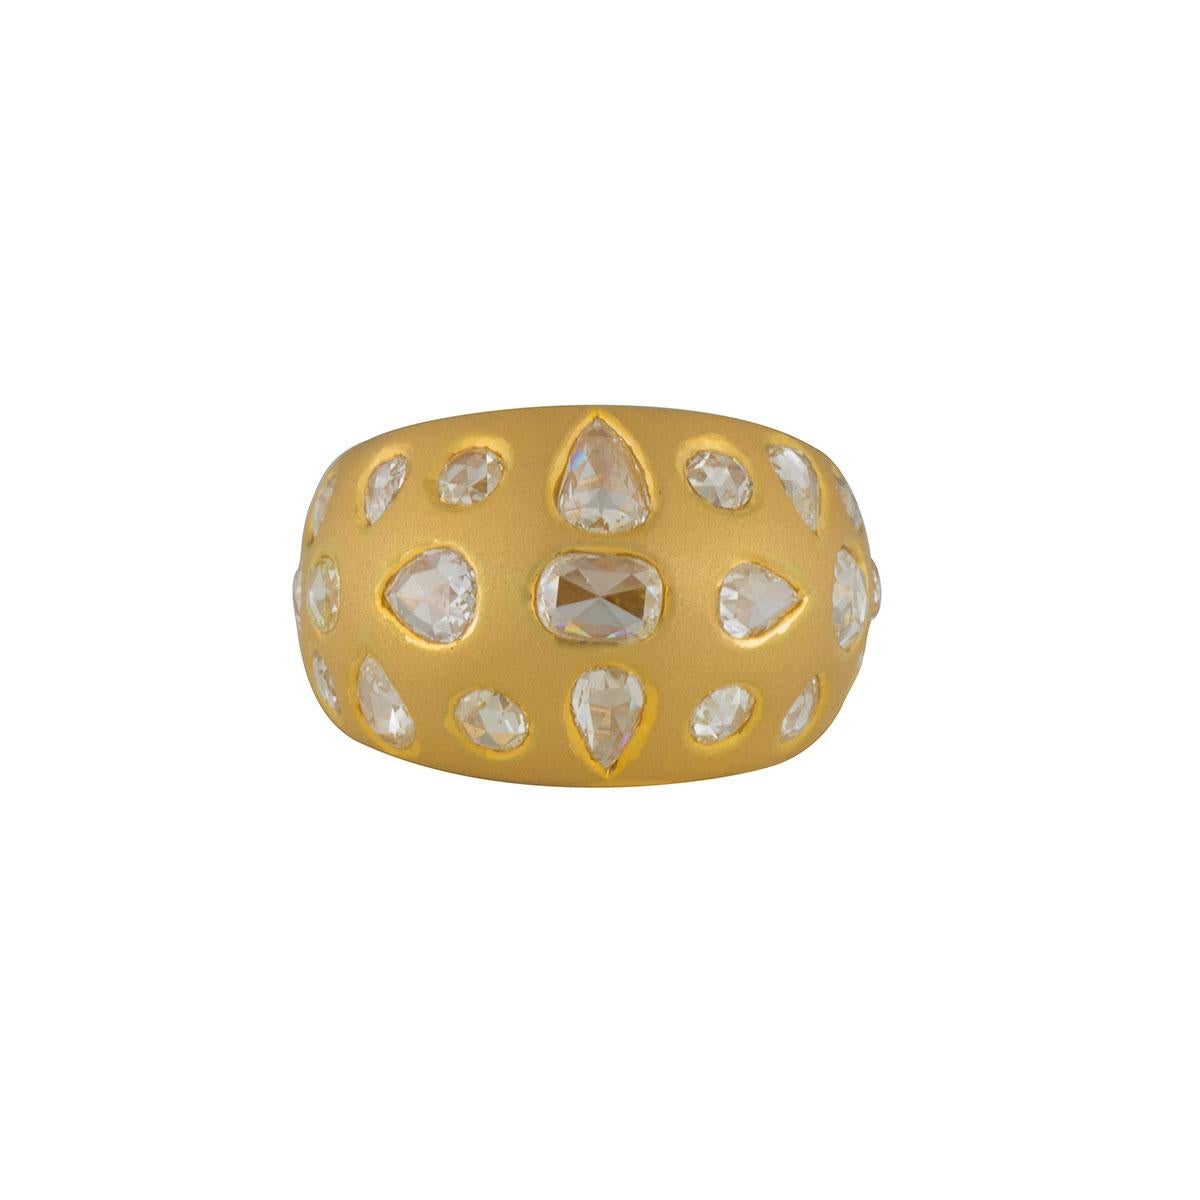 A unique 18k yellow gold diamond bombe dress ring.  The ring is set with 22 varied rose cut diamonds scattered across the front of the ring in a rubover setting with a total diamond weight of approximately 2.91ct, G colour and VS clarity. The ring